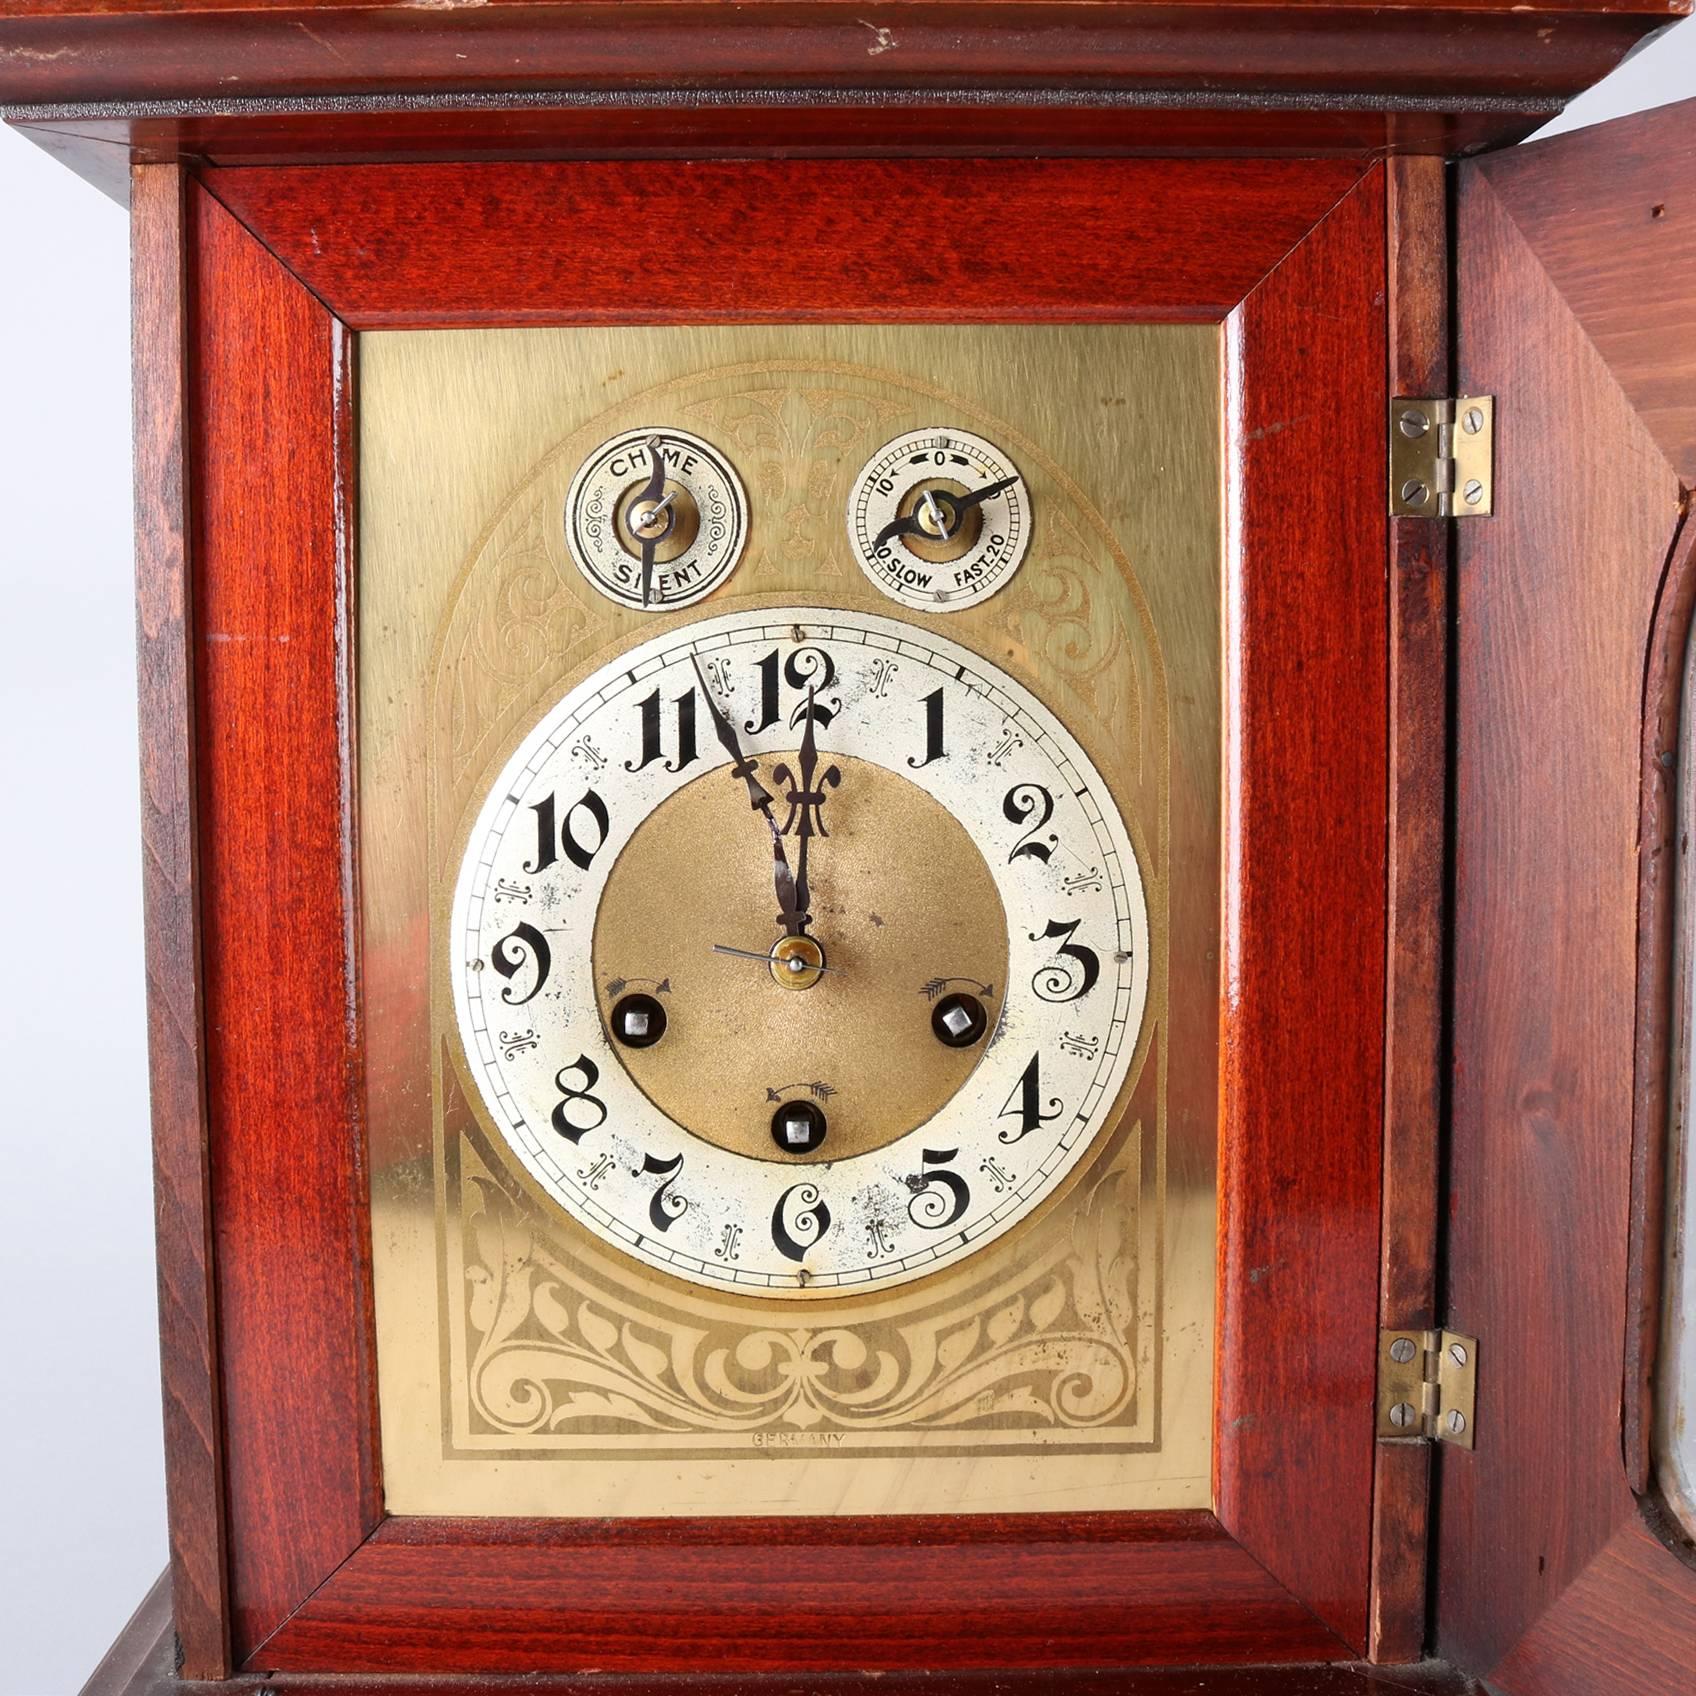 Antique German bracket clock features works by Junghans with a scroll decorated case marked 